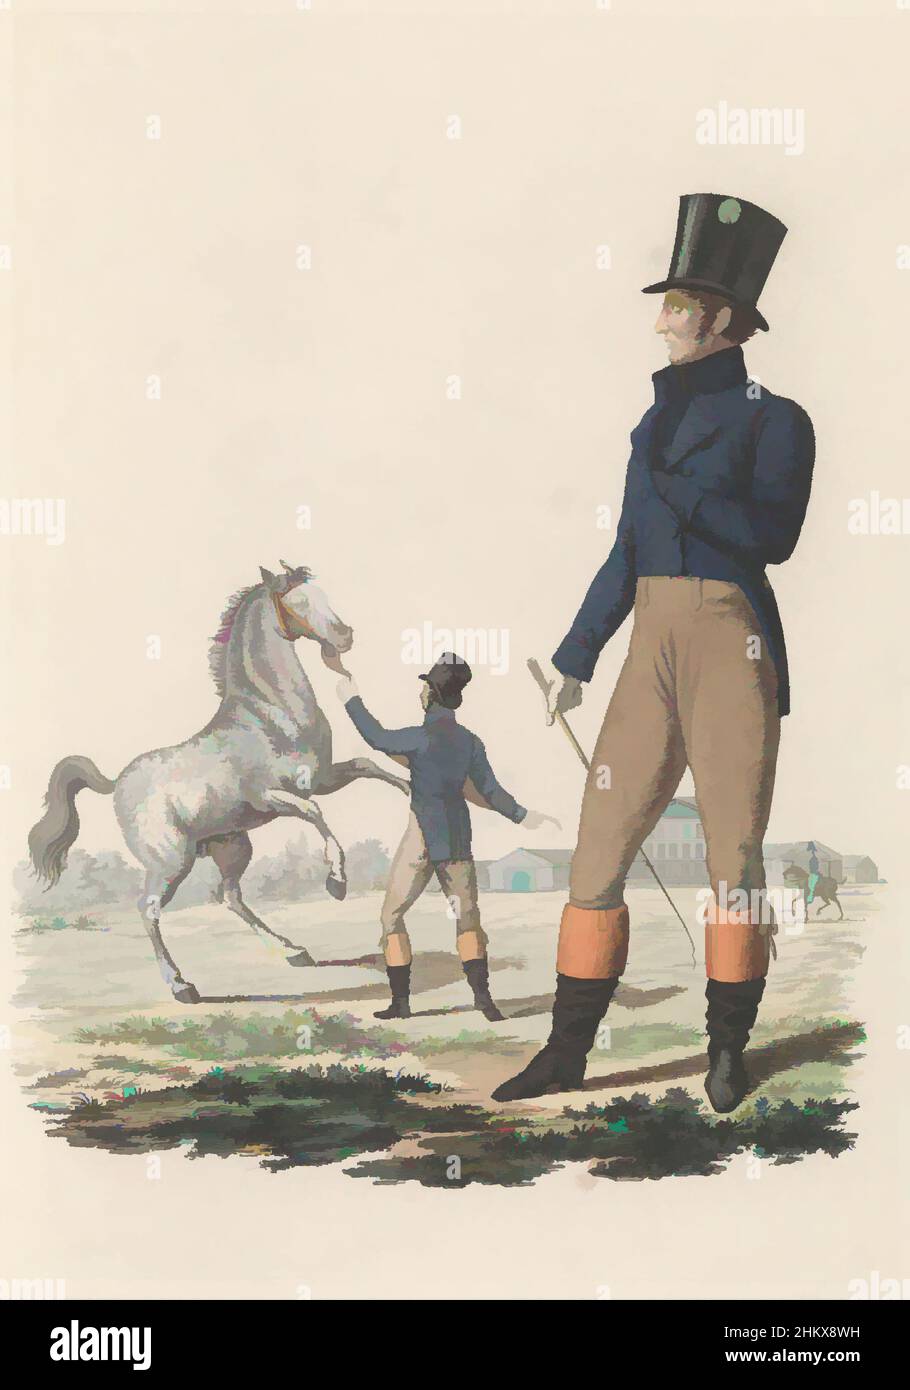 Art inspired by Servants of the State Stud farms, A Dutch servant of the State Stud farms, with a horse. Plate 63. Uniform presentation in 'Continuation of the Description as to the Royal Dutch troops' by J.F. Teupken, 1826., print maker: Dirk Sluyter, print maker: Joannes Bemme, print, Classic works modernized by Artotop with a splash of modernity. Shapes, color and value, eye-catching visual impact on art. Emotions through freedom of artworks in a contemporary way. A timeless message pursuing a wildly creative new direction. Artists turning to the digital medium and creating the Artotop NFT Stock Photo